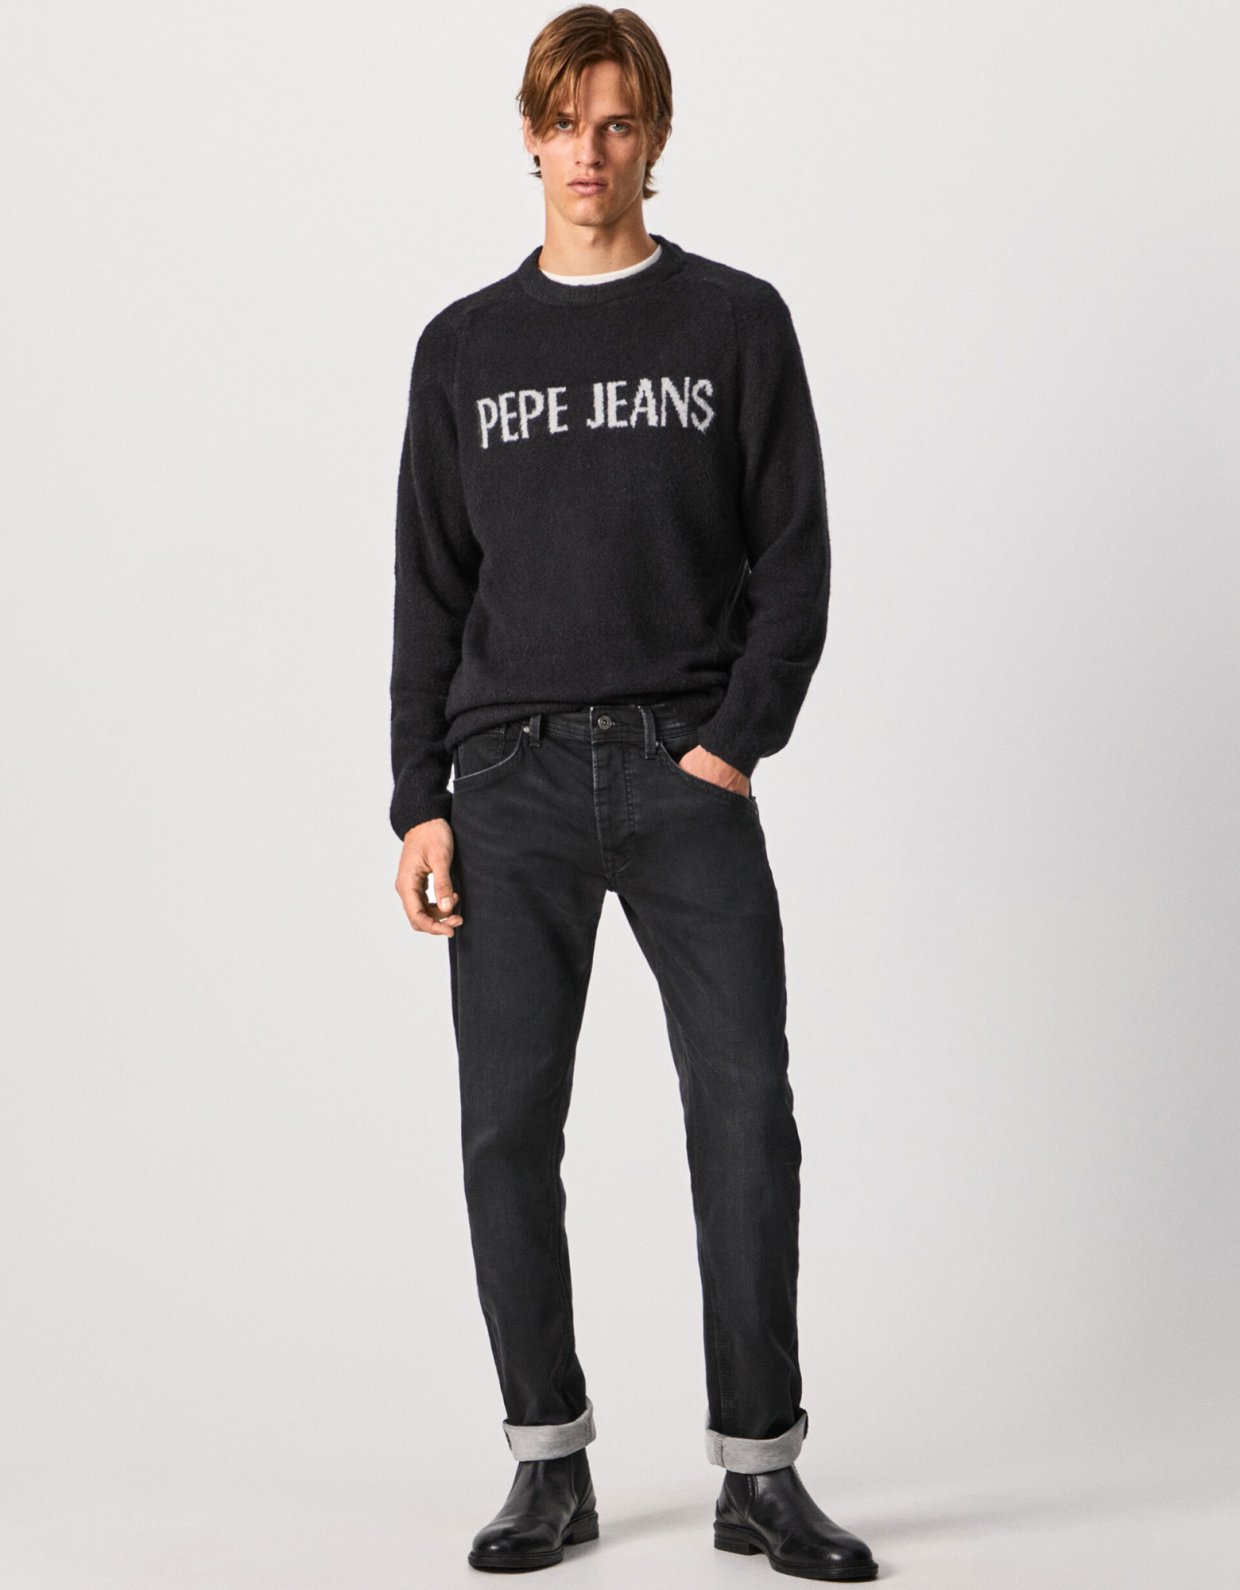 Pepe Jeans Track 32 jeans